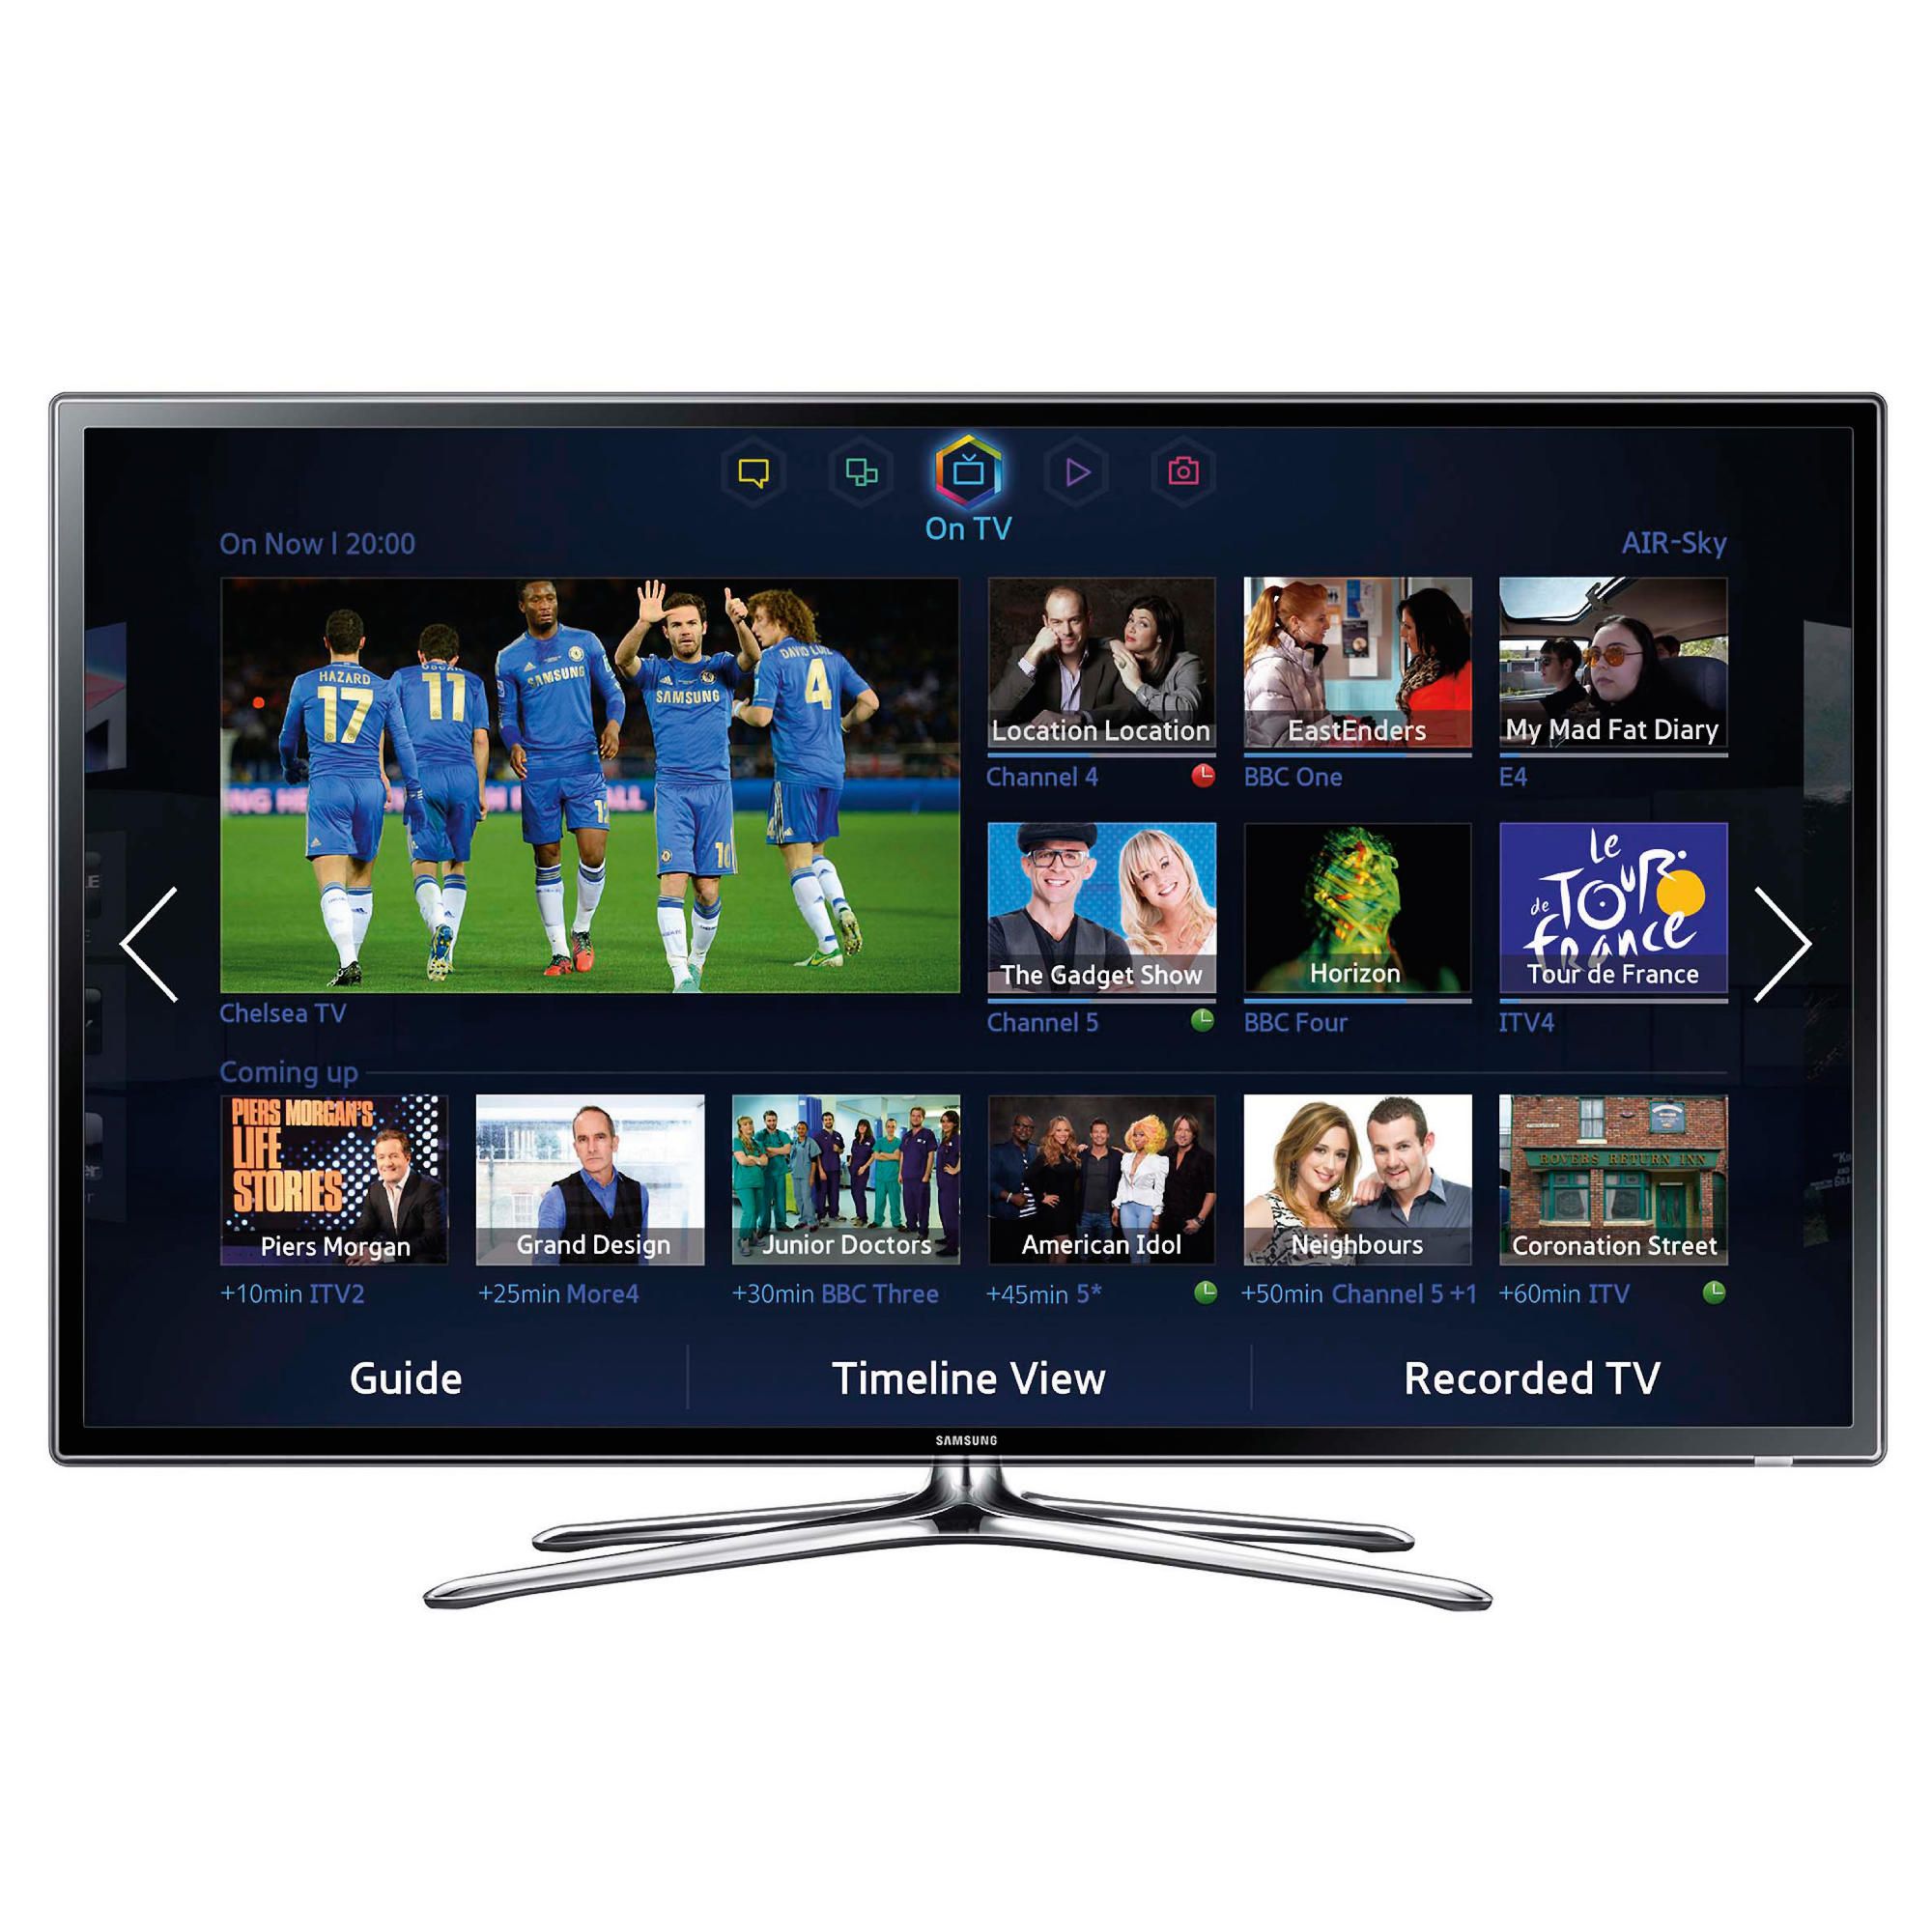 Samsung UE40F6320 40 Inch Full HD 1080p 3D Slim LED Smart WiFi TV with Freeview HD